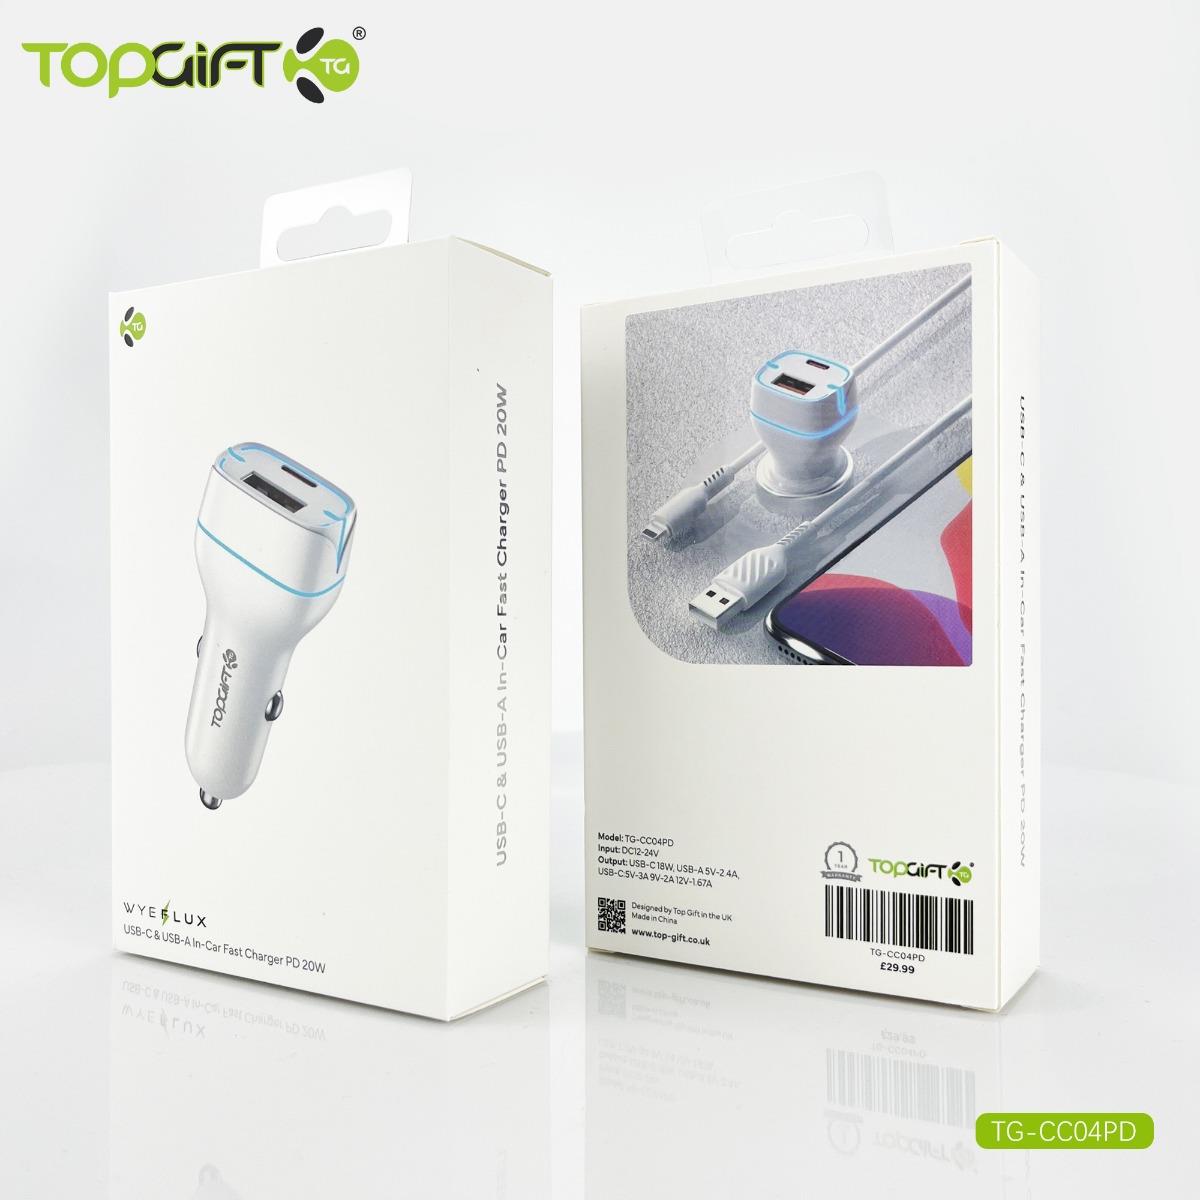 In-Car Fast Charger PD 20W USB-C & USB-A WYEFLUX